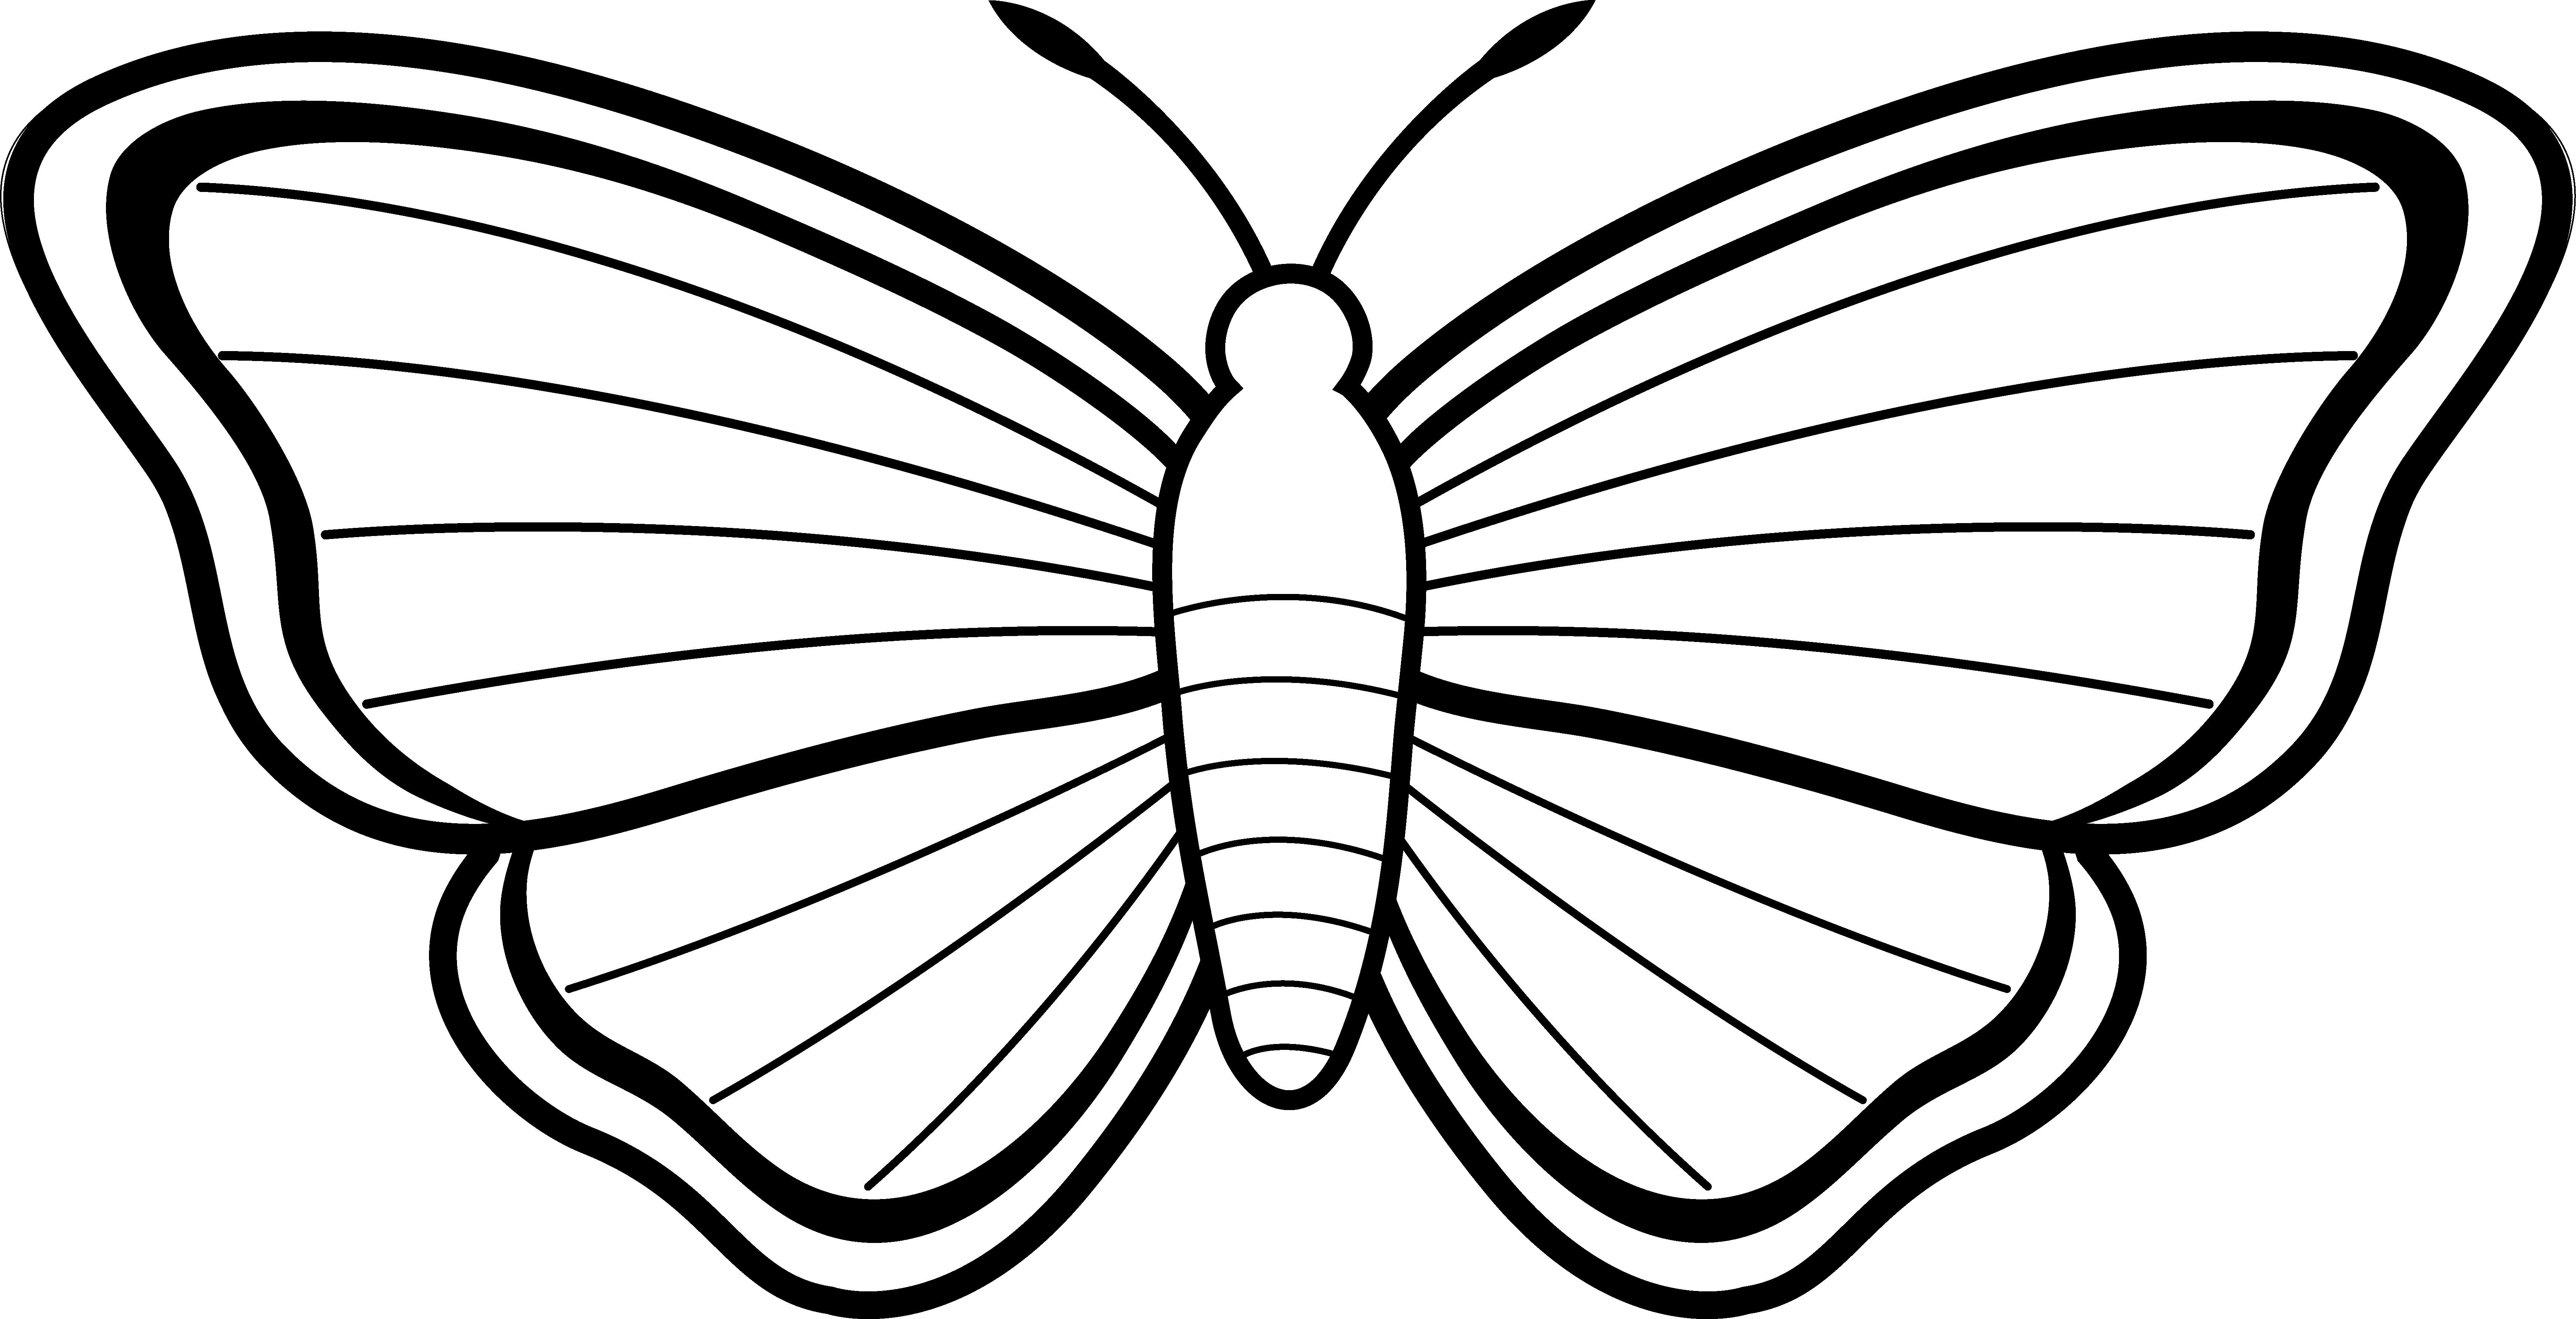 Cute Butterfly Line Drawing | Free Download Clip Art | Free Clip ...